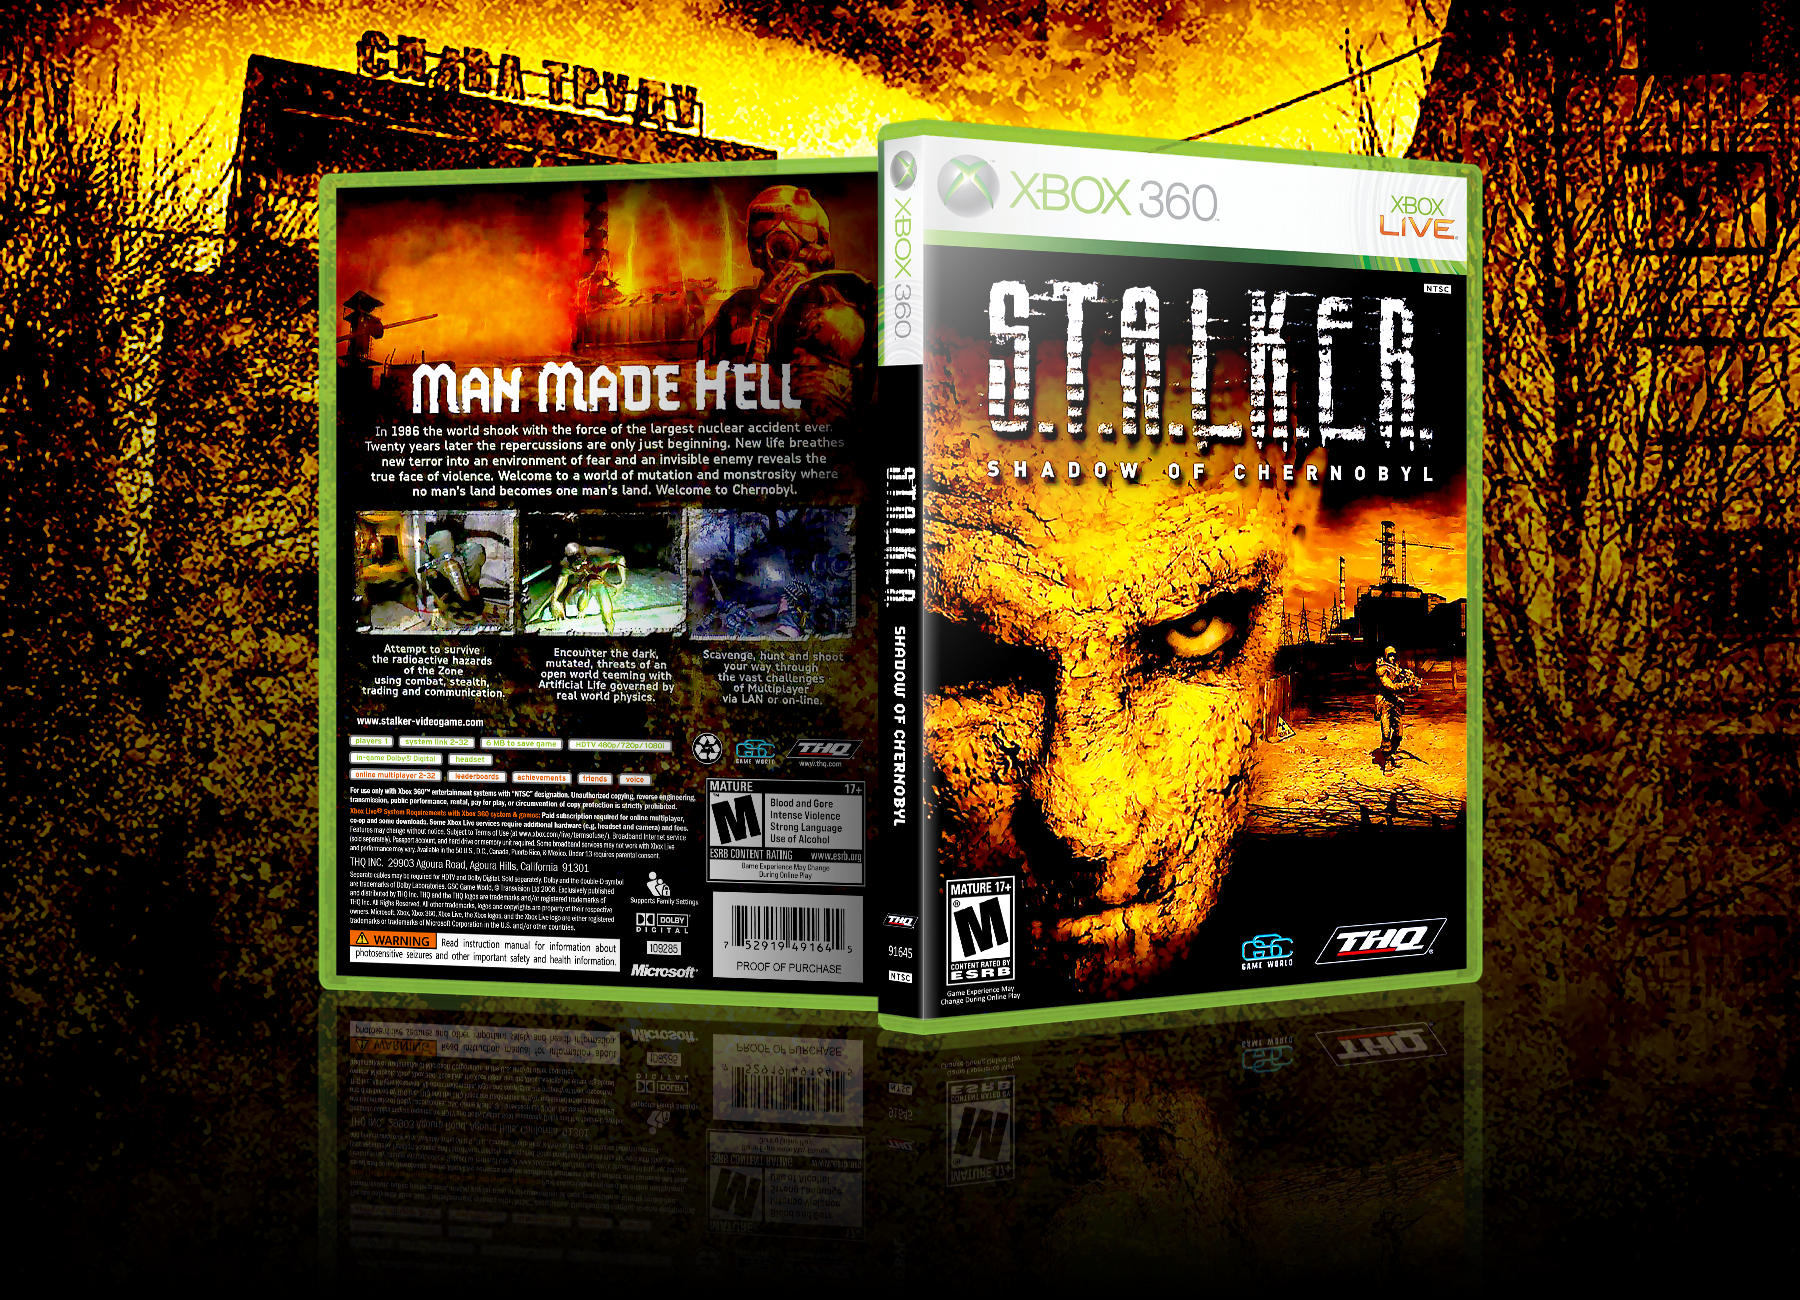 S.T.A.L.K.E.R.: Shadow of Chernobyl box cover